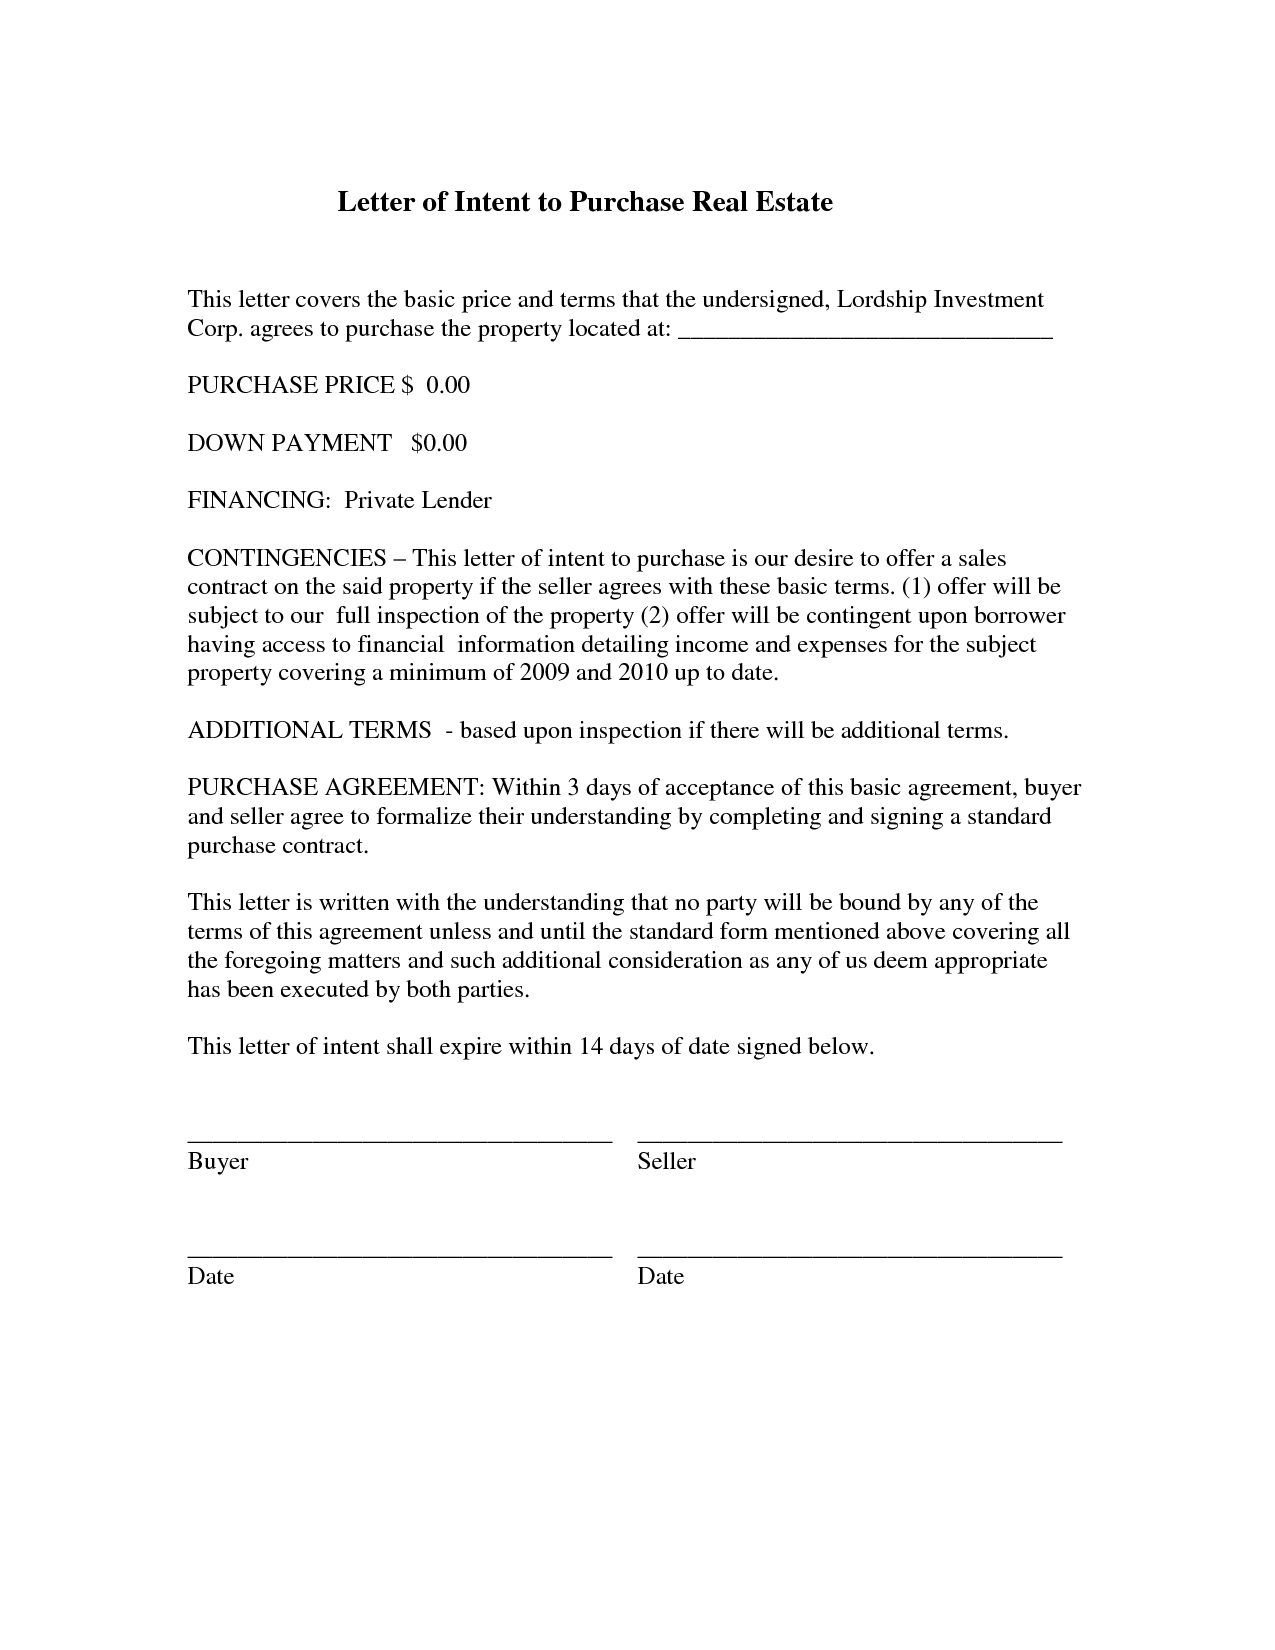 Real Estate Intent To Purchase Agreement Letter Of Intent Purchase Real Estate Edit Paper Online